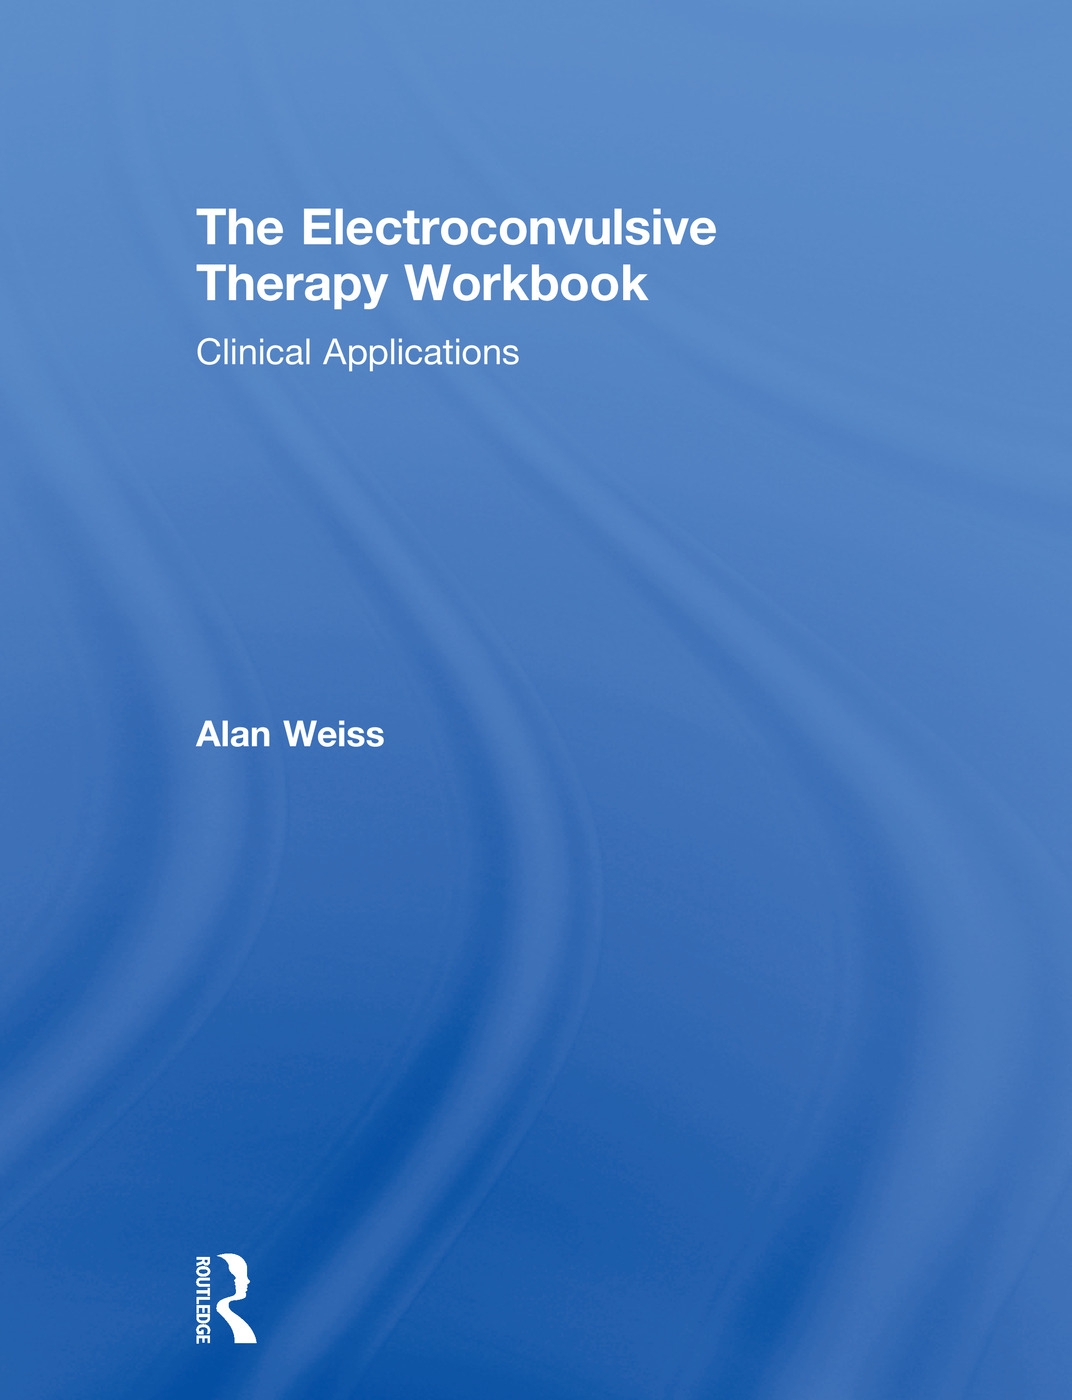 The Electroconvulsive Therapy: Clinical Applications